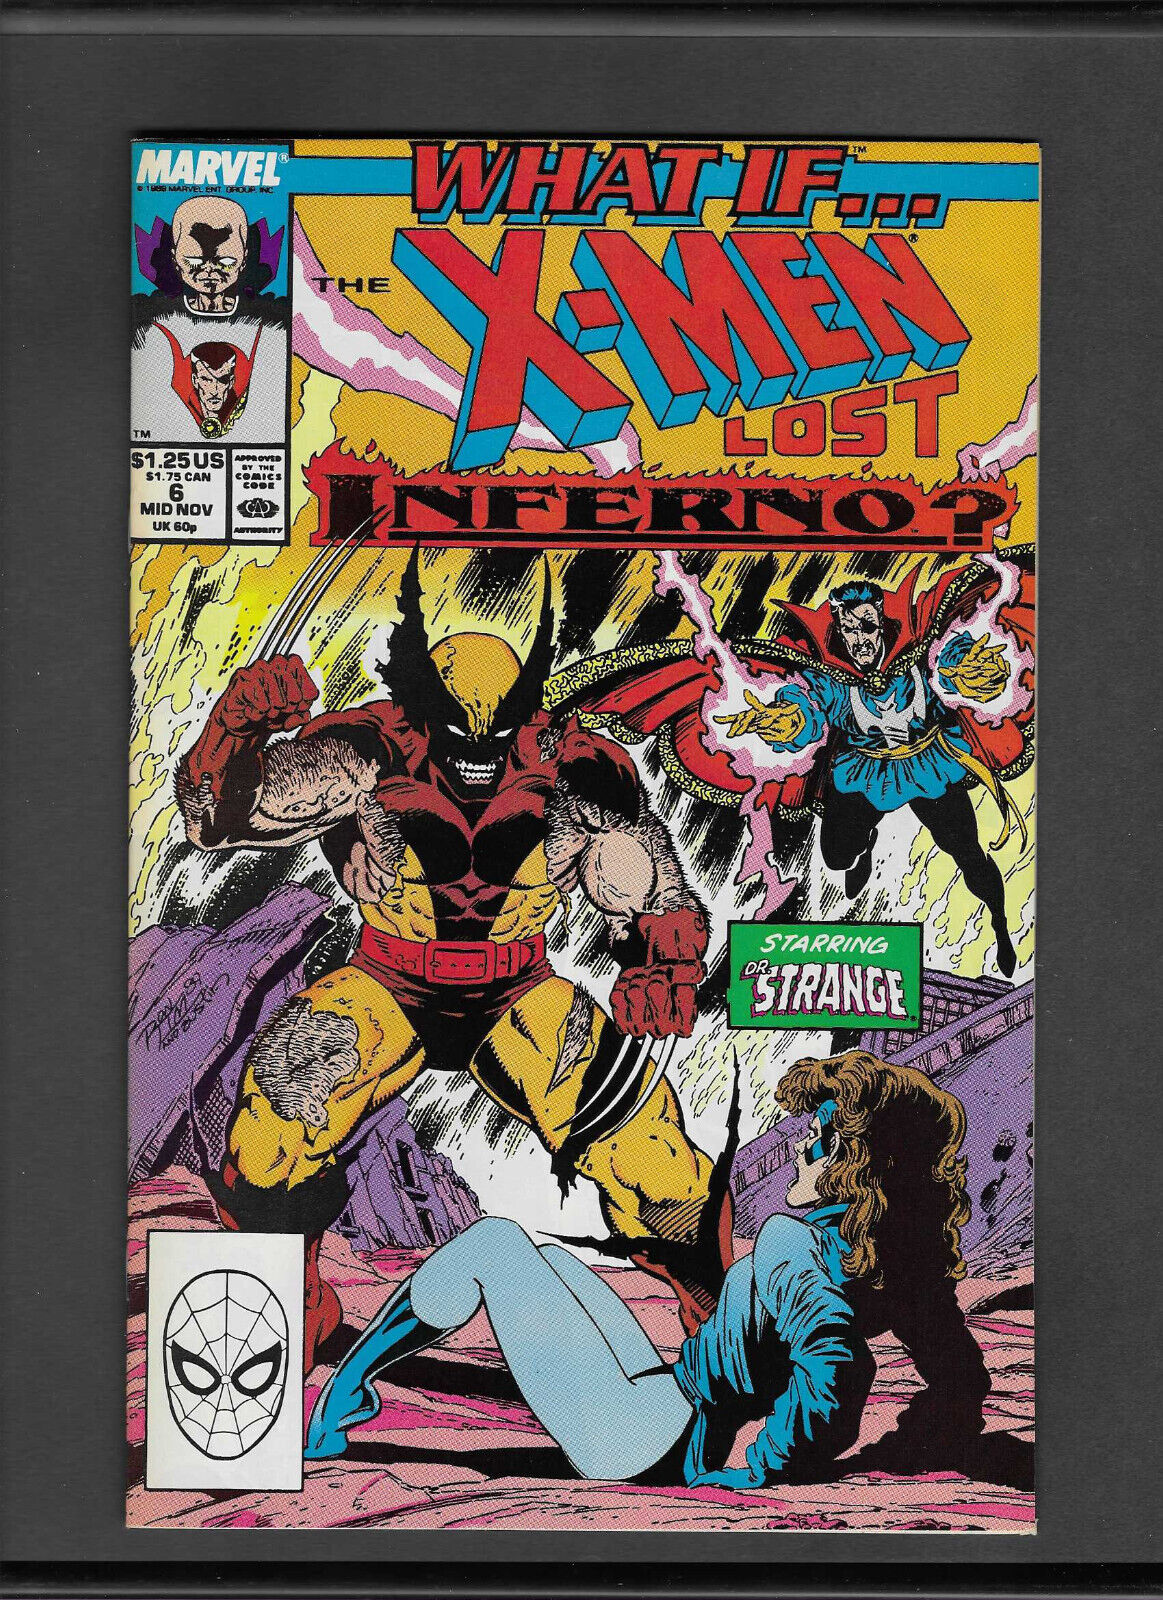 What If...? #6 (1989 Series) X-Men Lost Inferno? Very Fine/Near Mint (9.0)